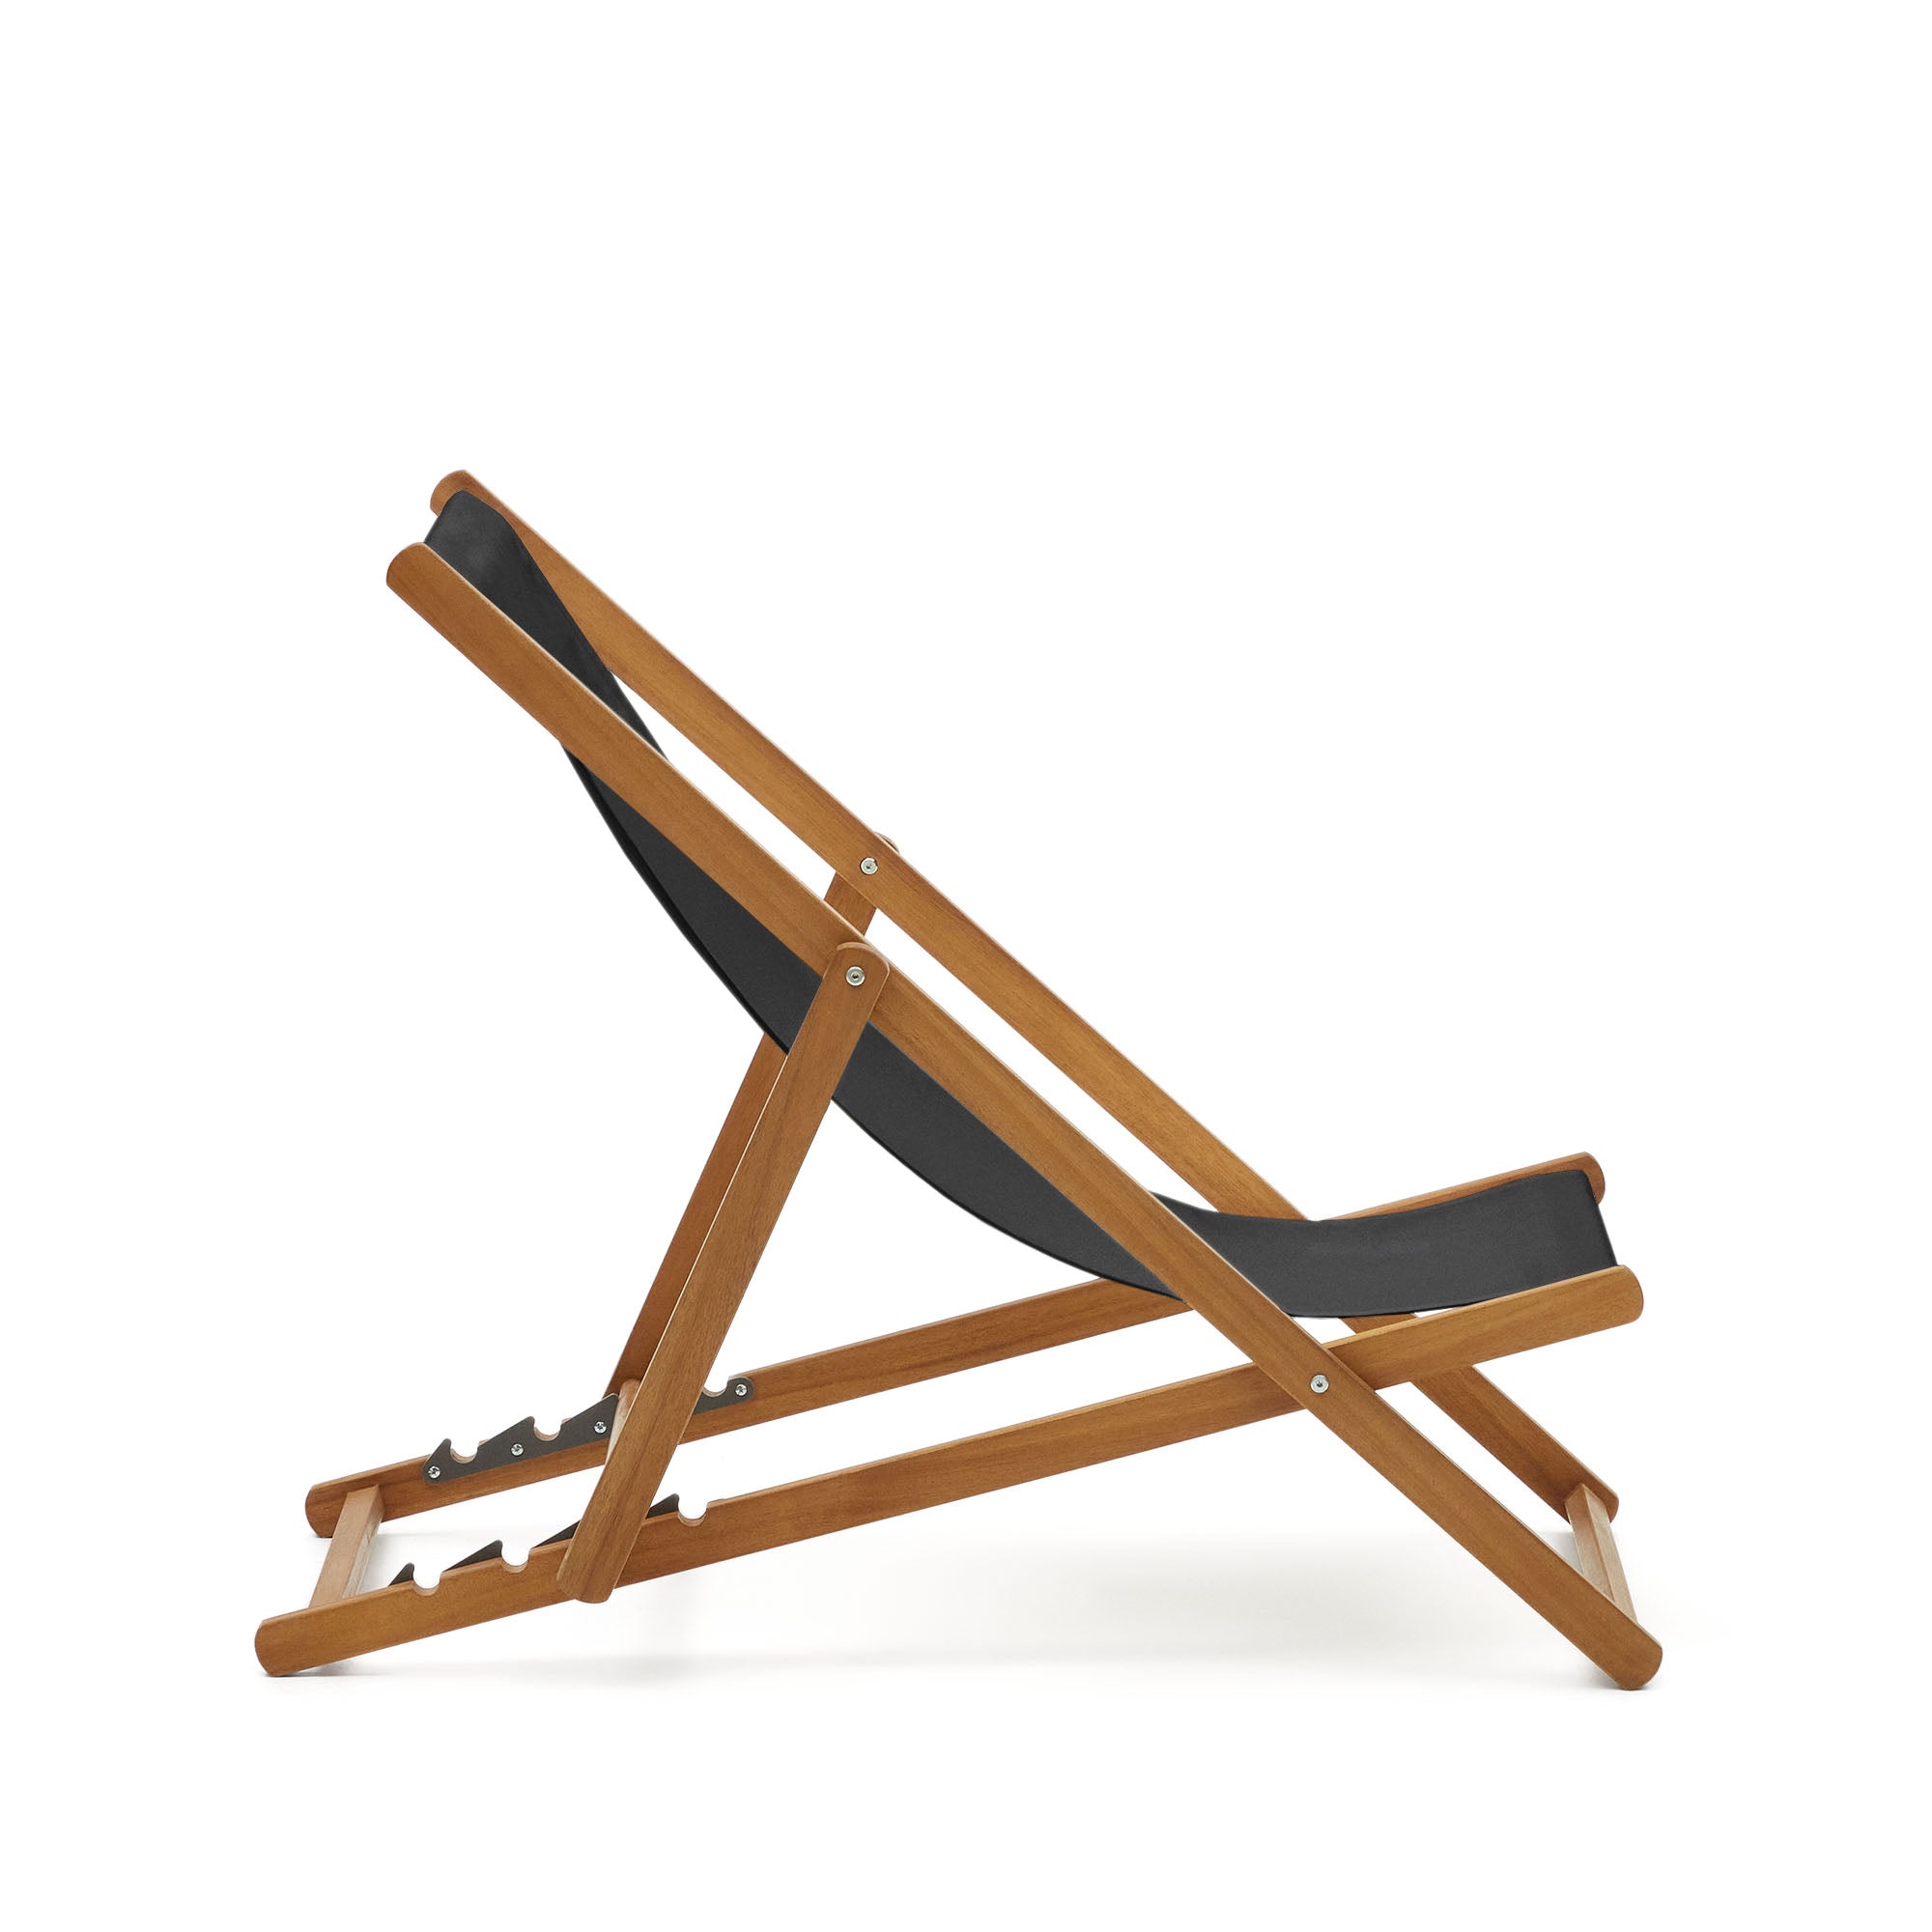 Adredna folding outdoor deck chair in black with solid acacia wood FSC 100%